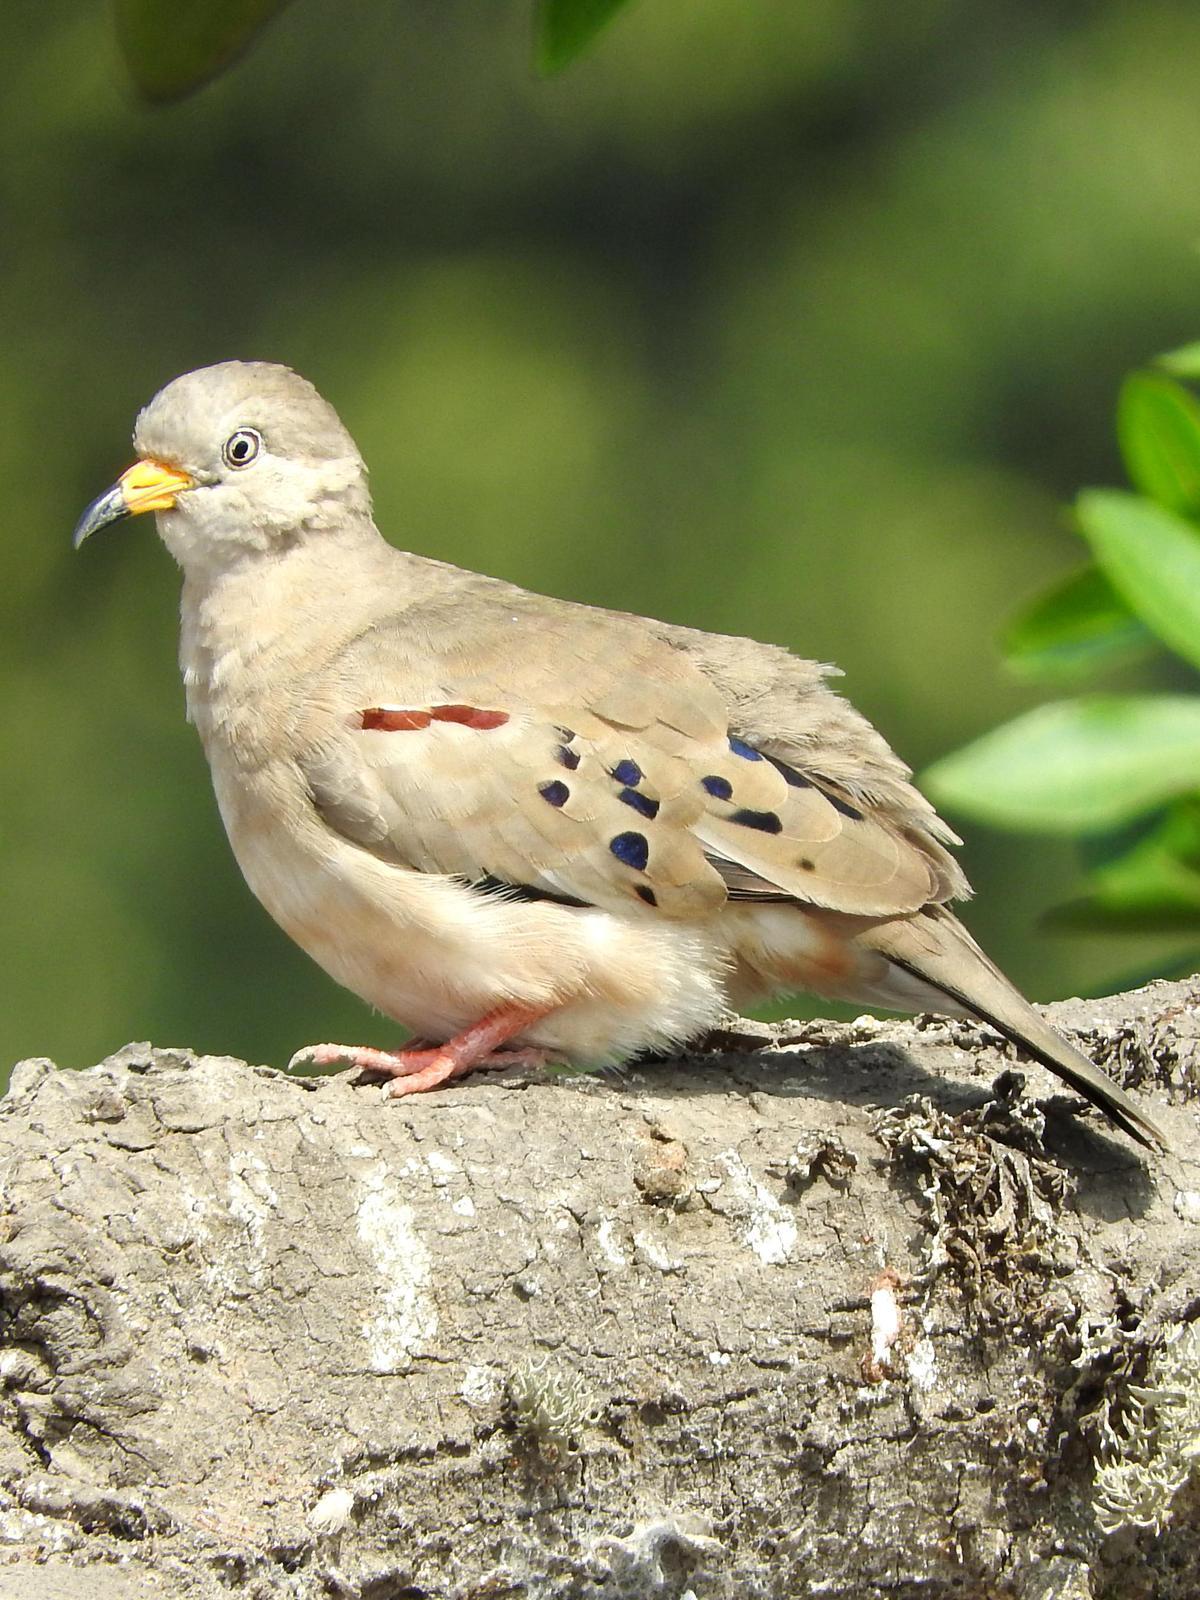 Croaking Ground Dove Photo by Todd A. Watkins